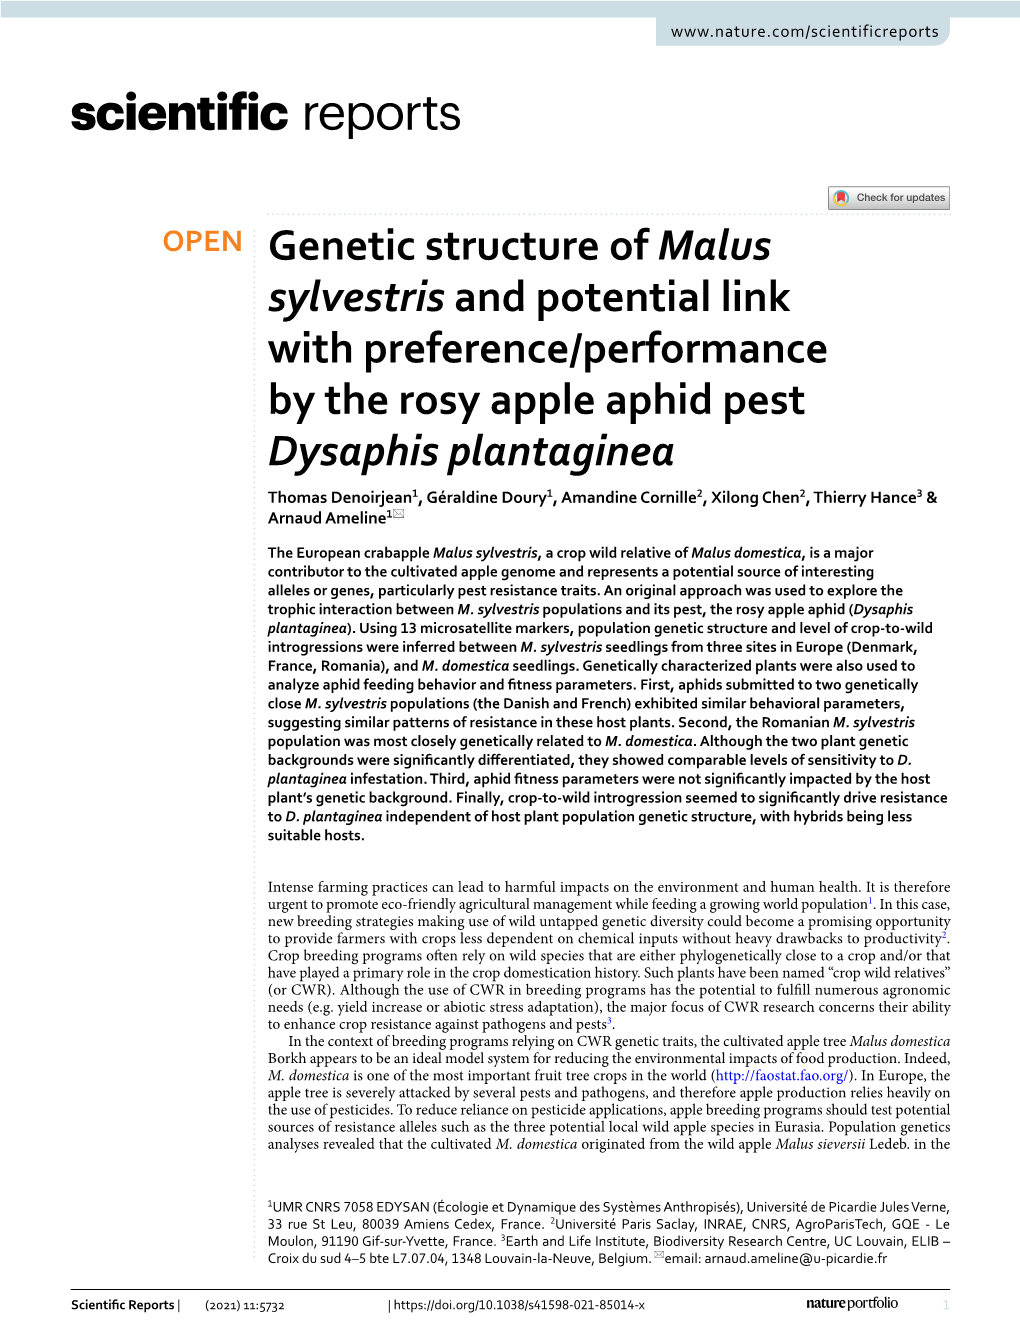 Genetic Structure of Malus Sylvestris and Potential Link with Preference